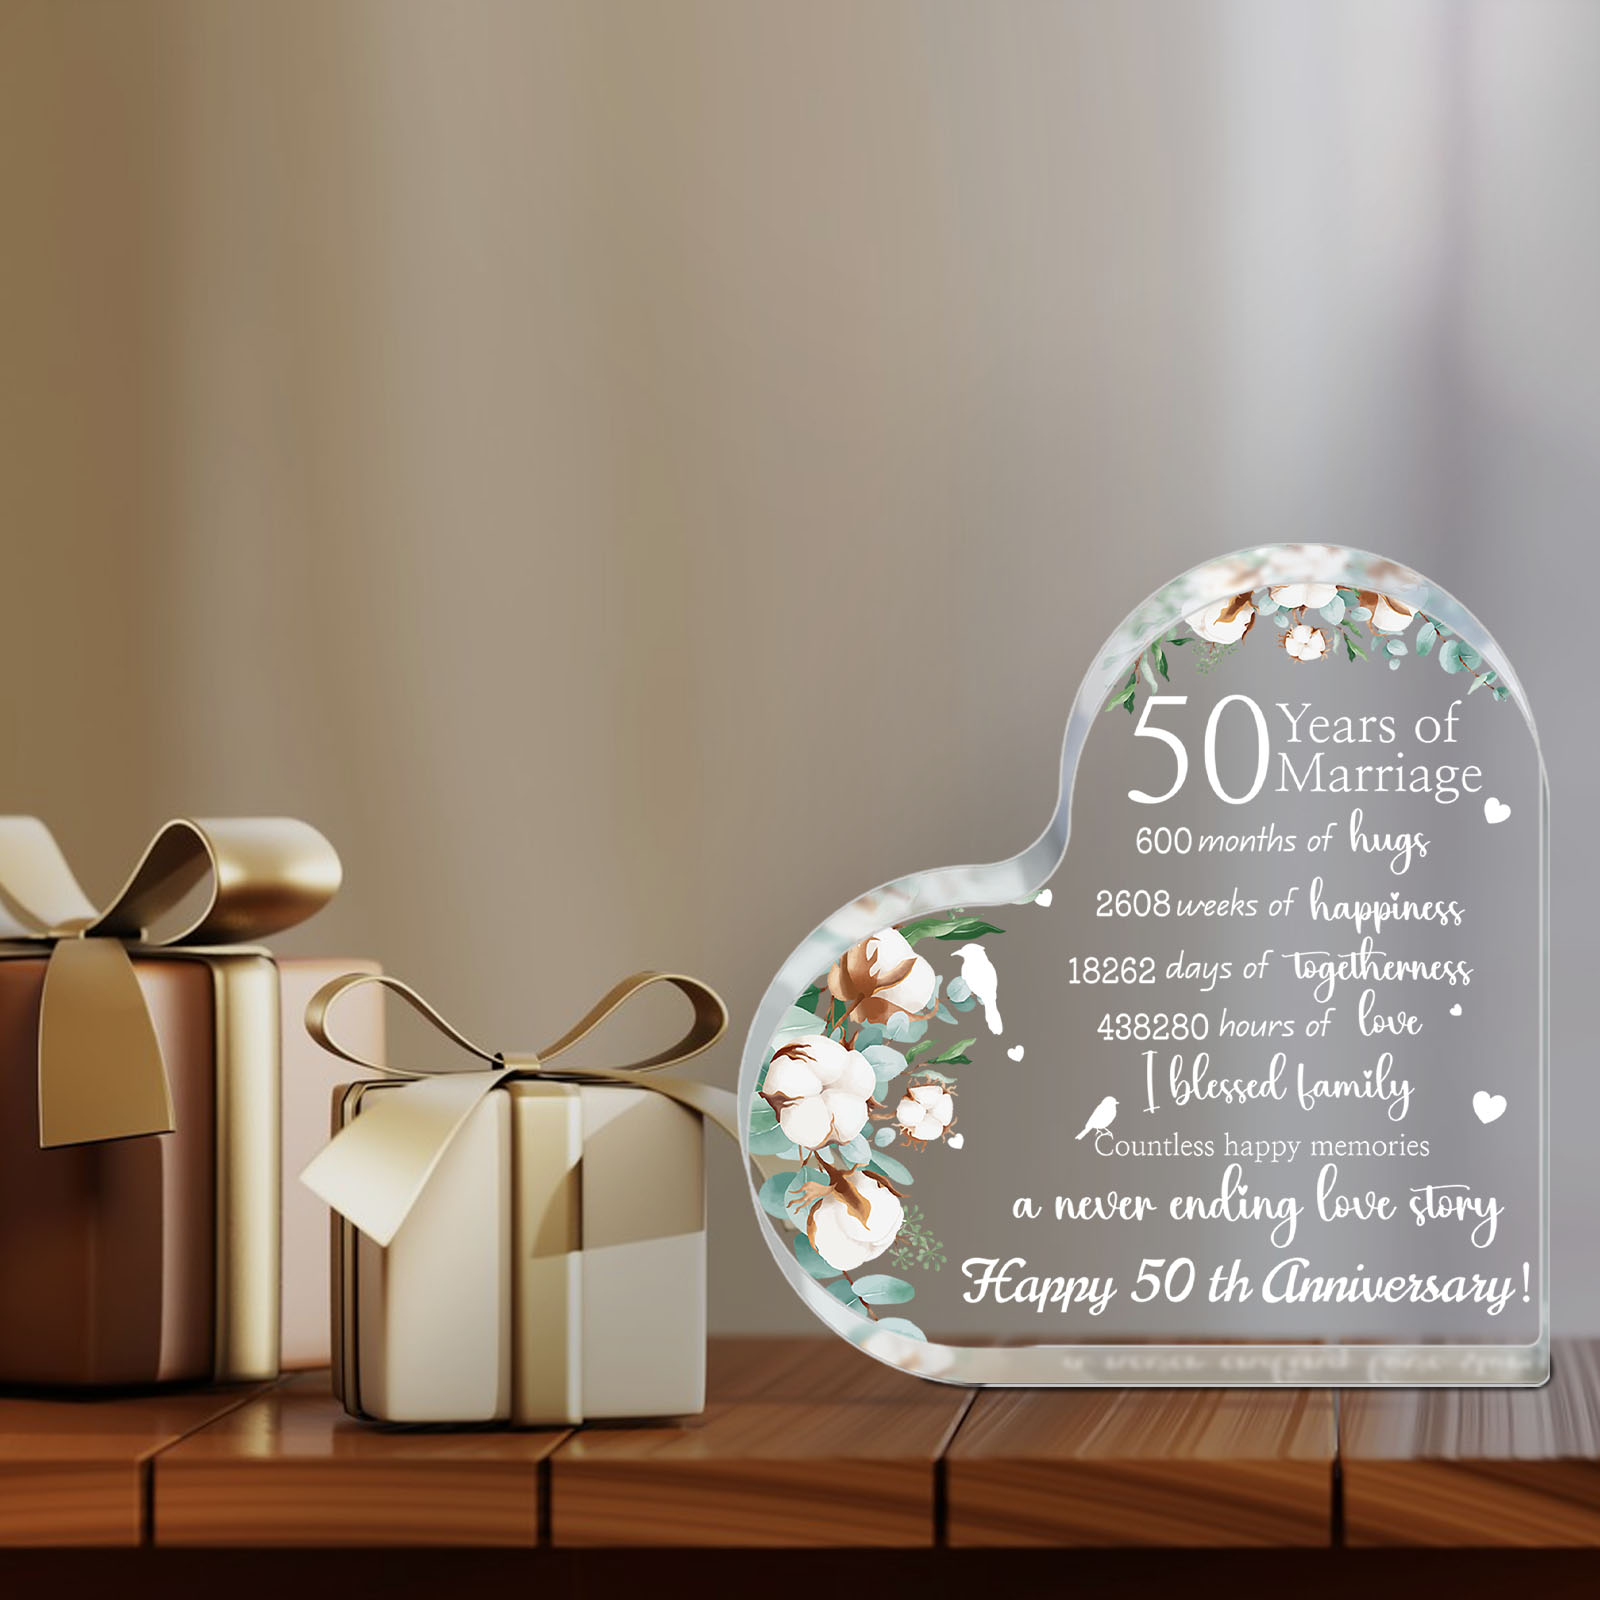 75 Gifts for 50th Wedding Anniversary in 2023 - National Today